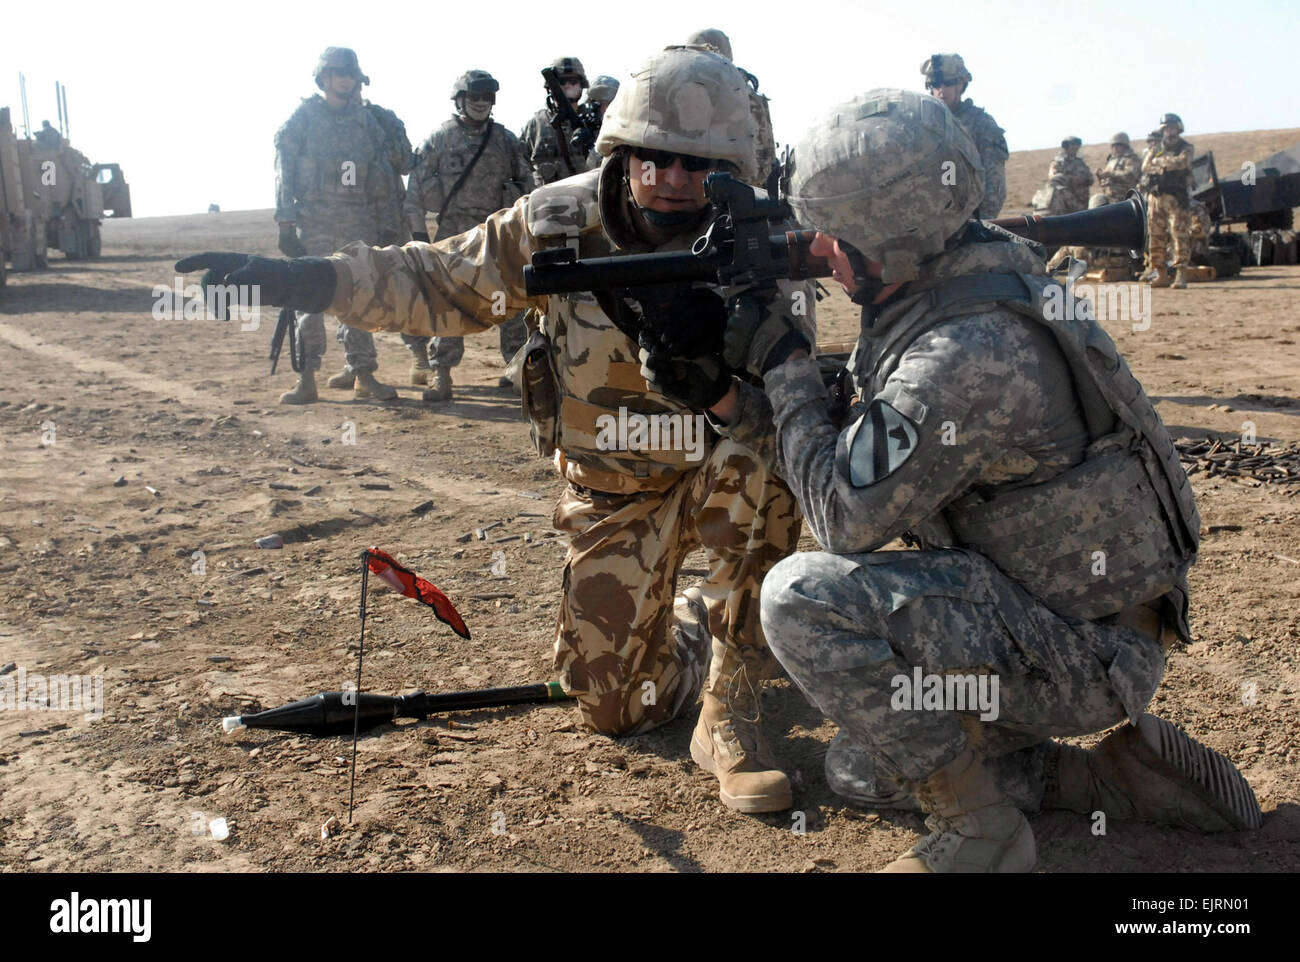 Spc. Justin Dreyer from the Special Troops Battalion, 4th Brigade Combat Team, 1st Cavalry Division, is instructed how to fire a rocket-propelled grenade launcher by a Soldier in the 341st Romanian Infantry Battalion during a cross-training event at the Bardia Firing Range near COB Adder, Iraq.  Pfc. Terence Ewings Stock Photo